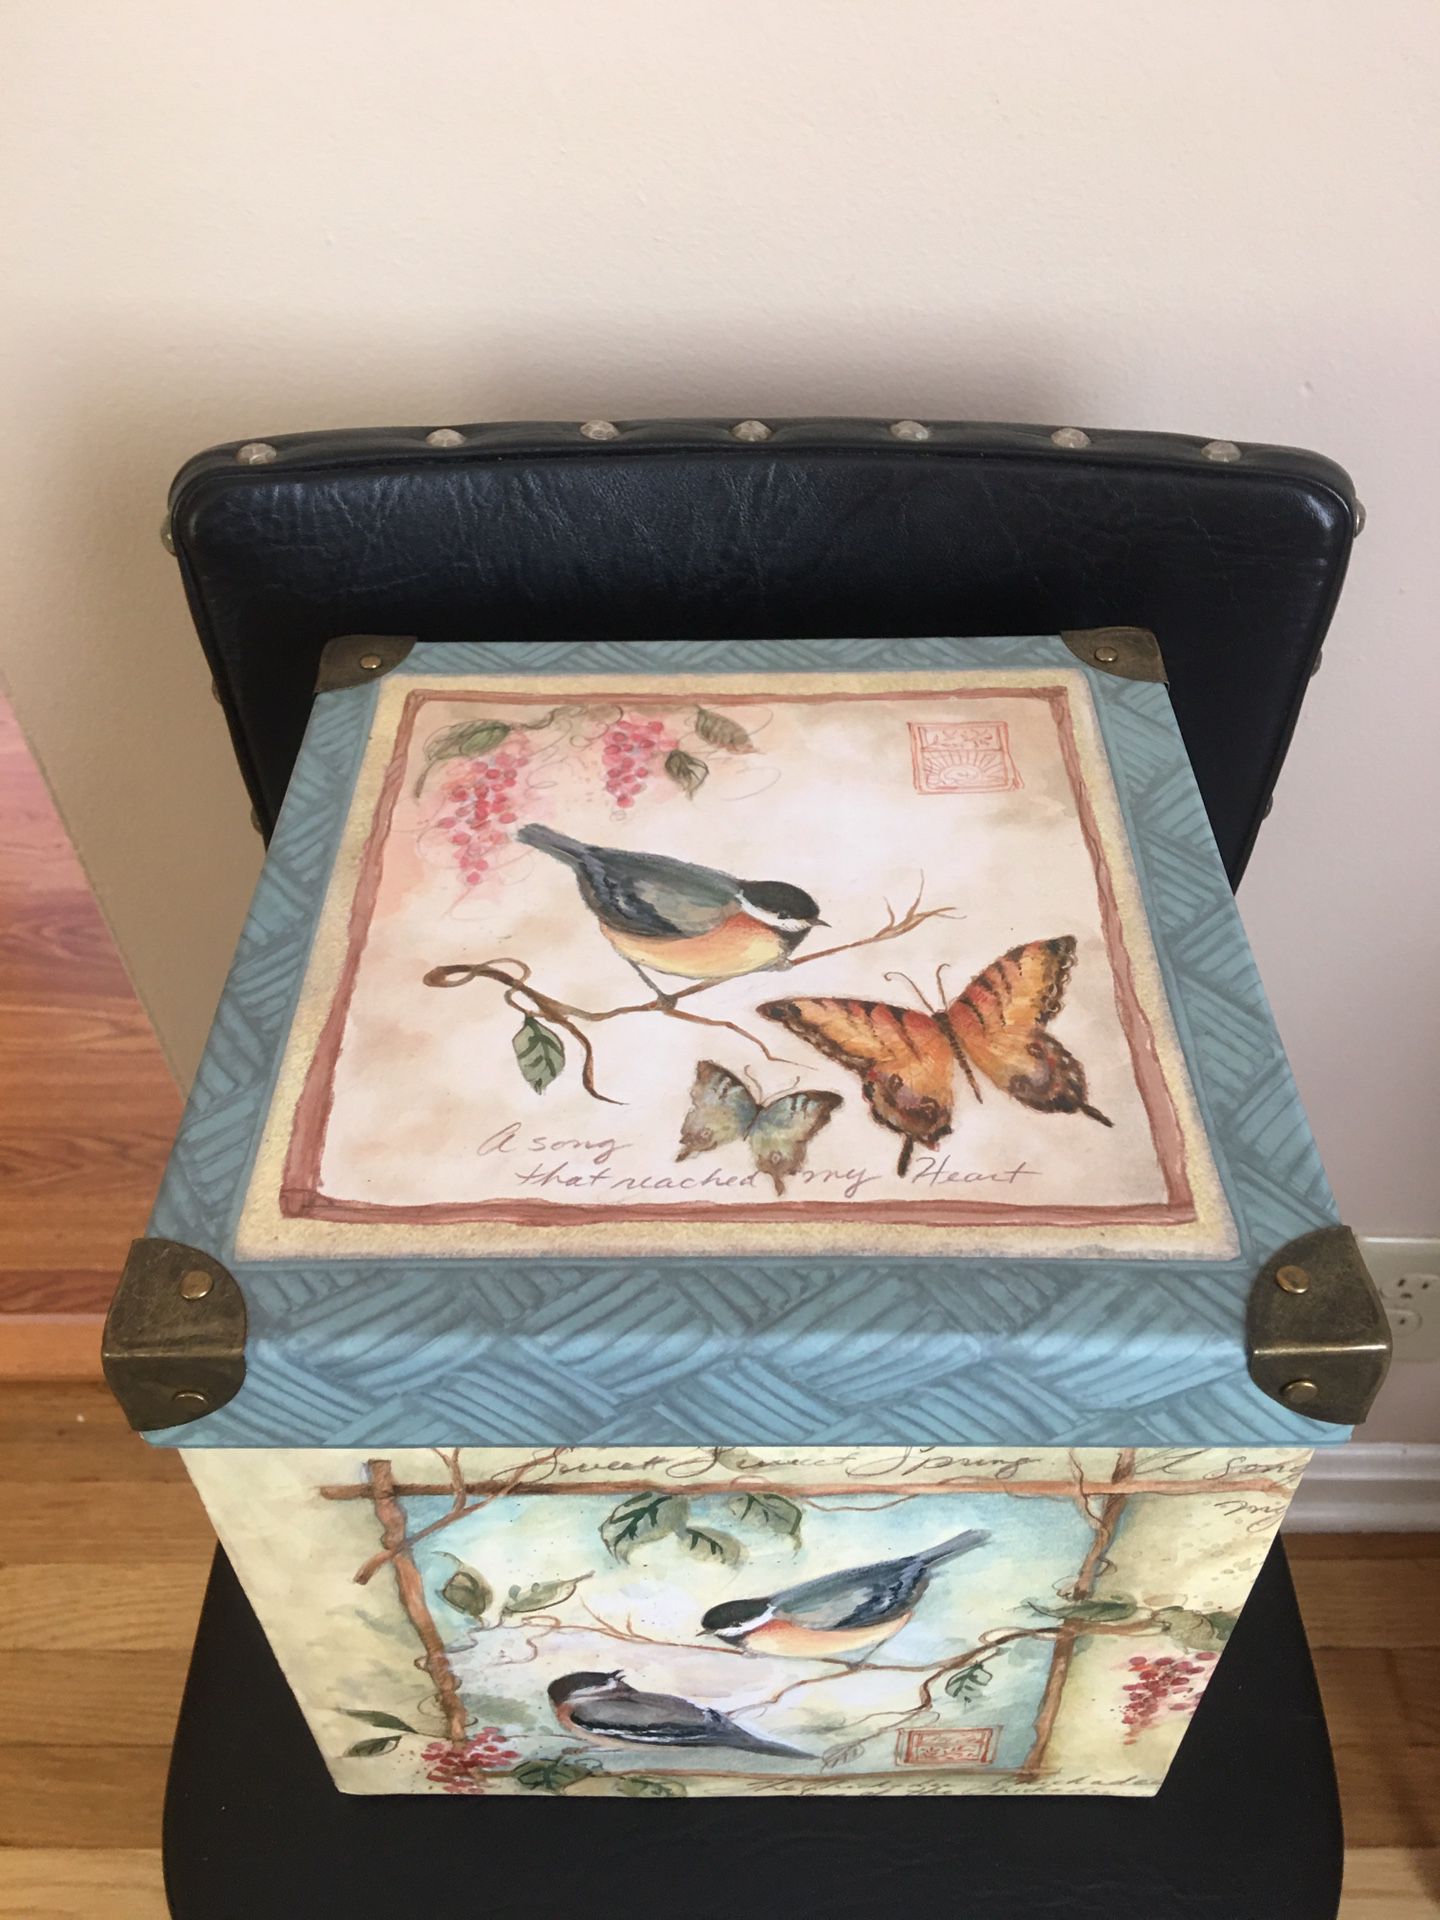 Butterflies & Birds Accent Box W/Lid 8.5” Square W/ Brass Edges LN Pick Up or Will Ship